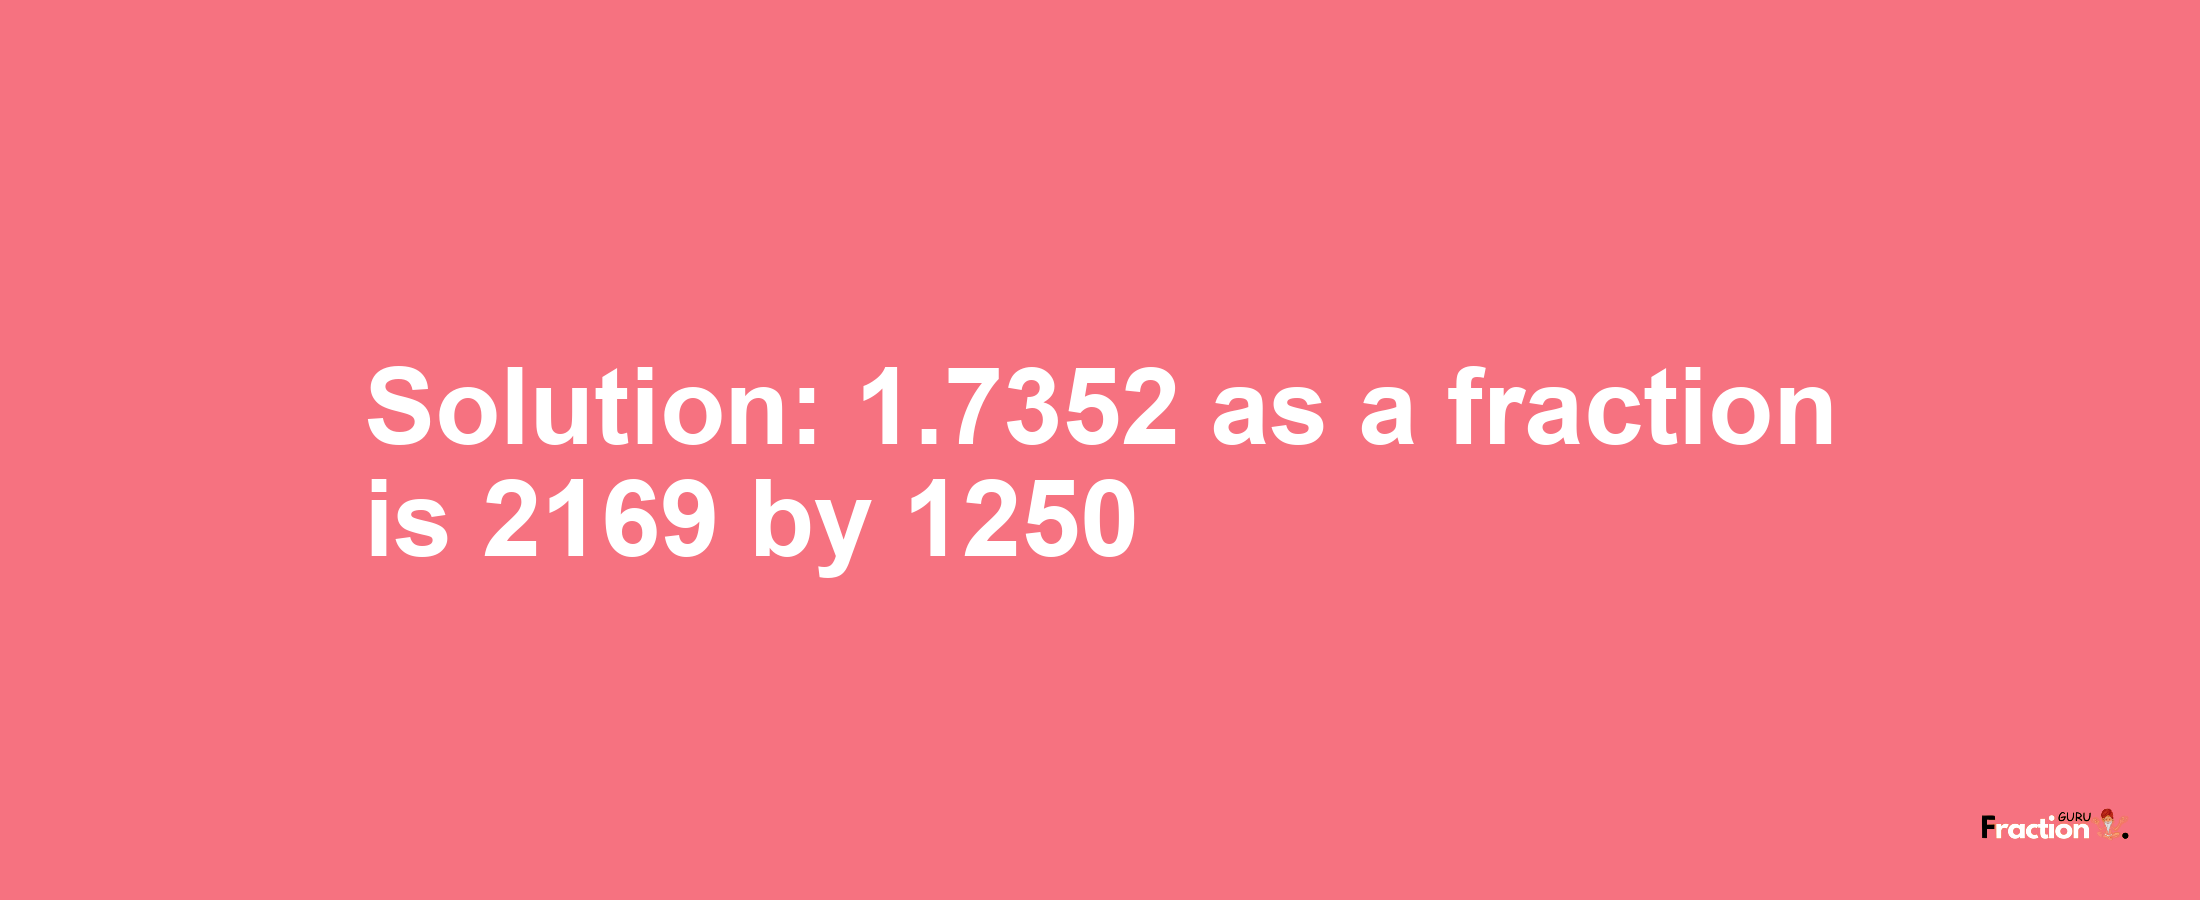 Solution:1.7352 as a fraction is 2169/1250